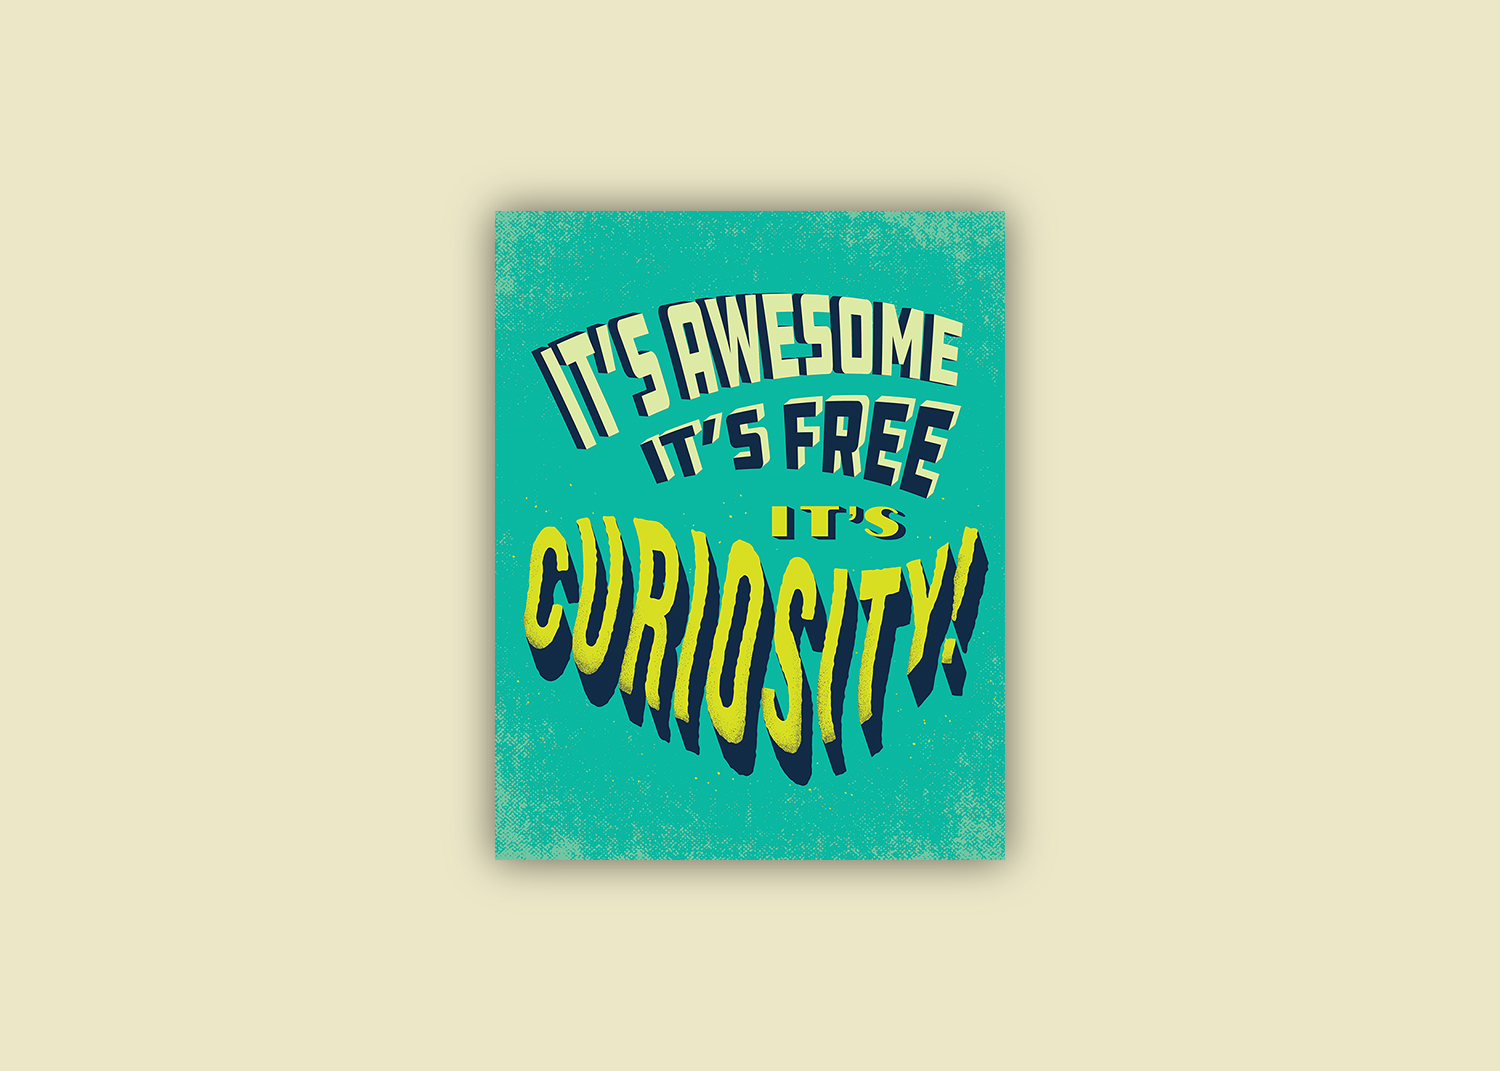 Awesome Free Curiosity Poster.jpg